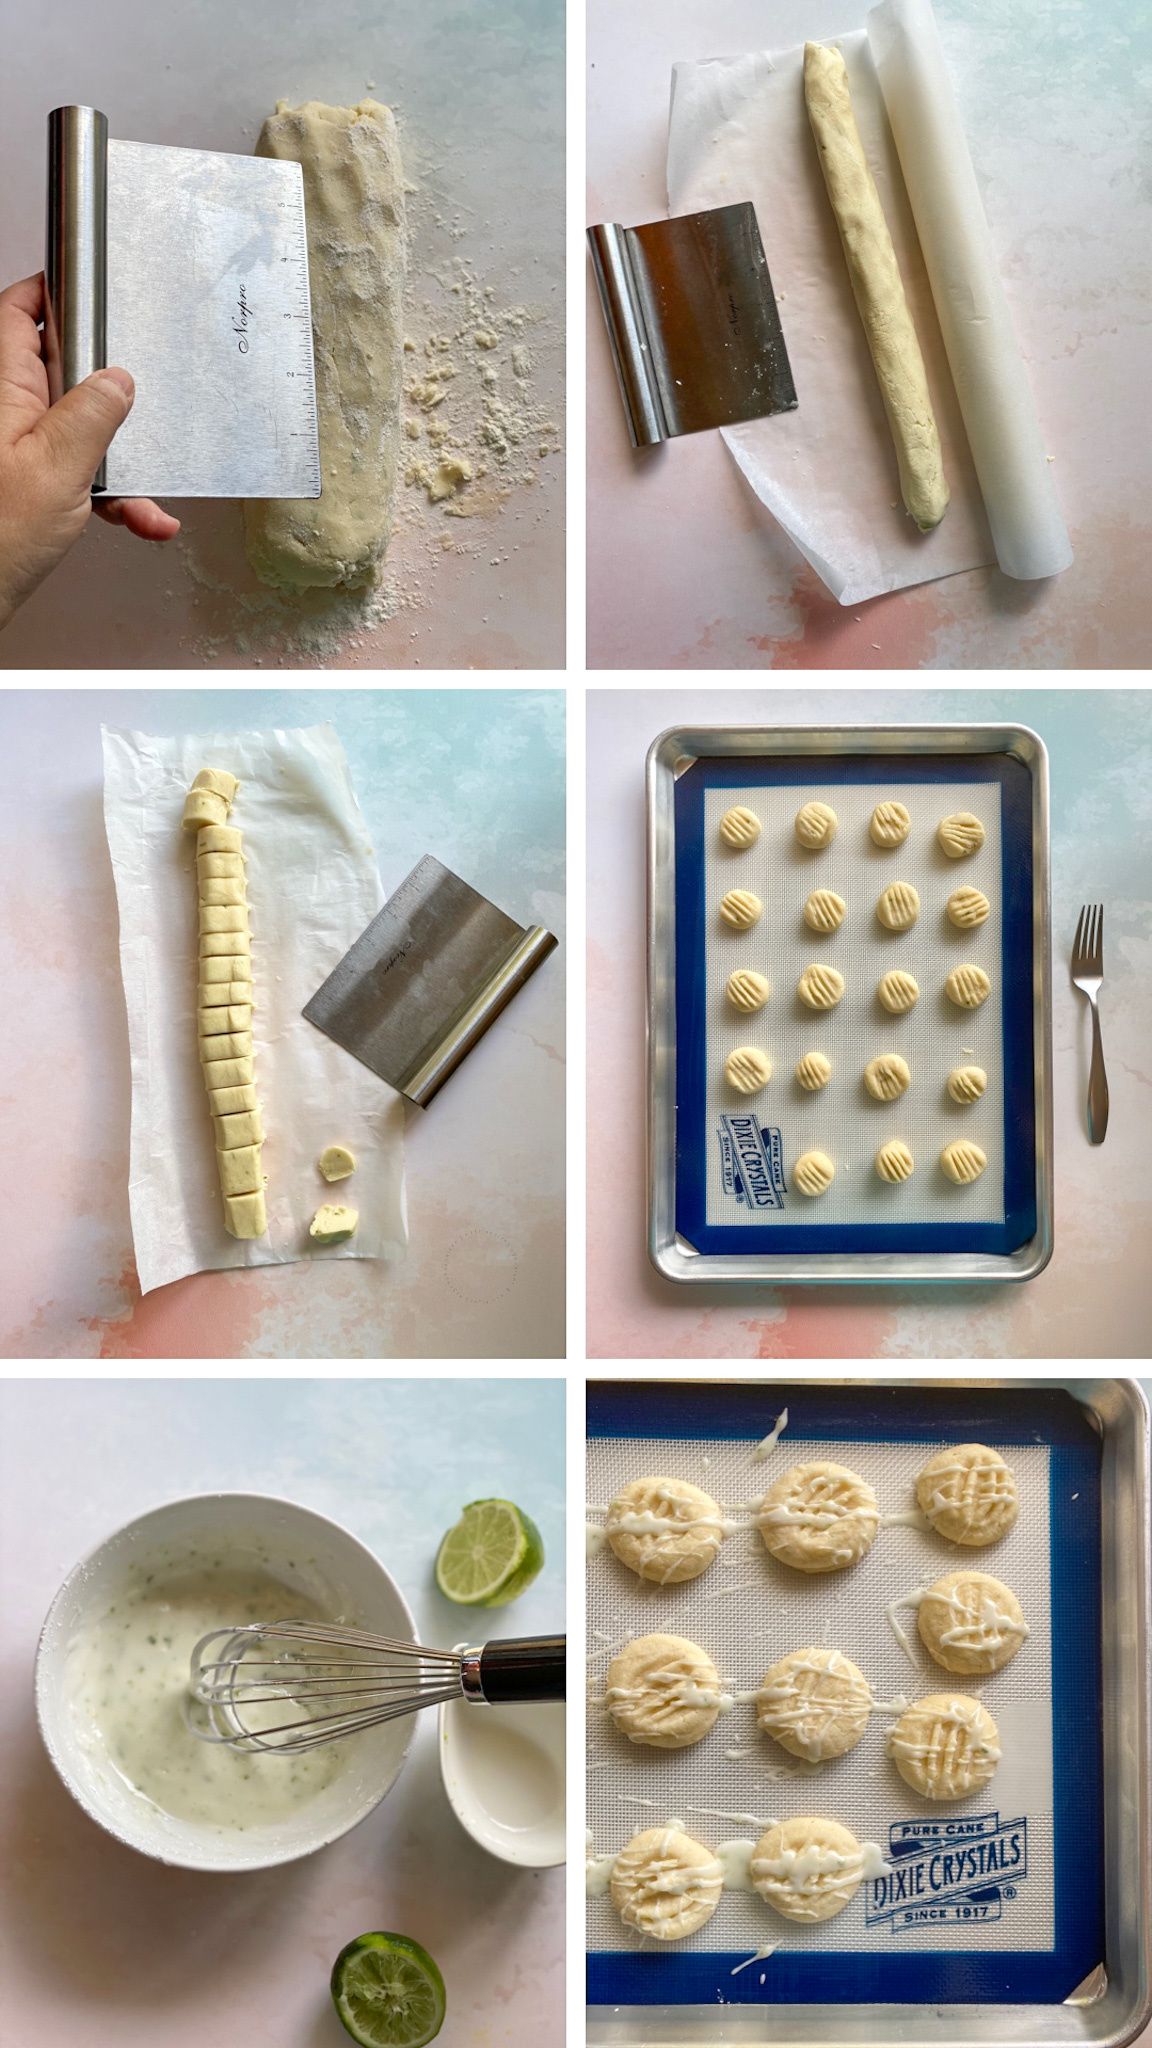 Step by step on how to form and bake the sequilhos